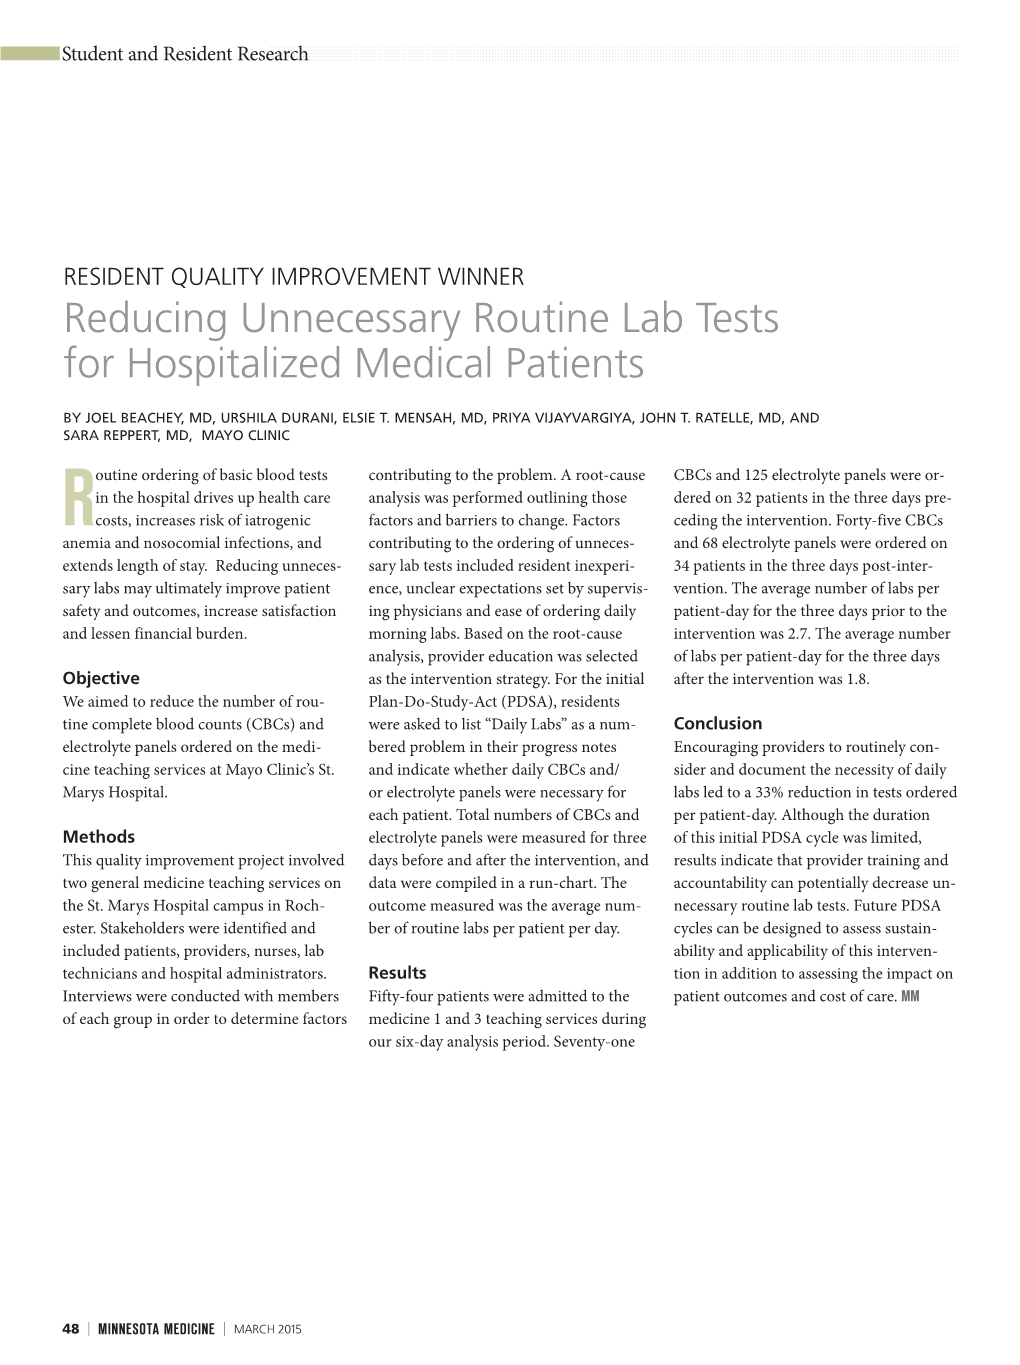 Reducing Unnecessary Routine Lab Tests for Hospitalized Medical Patients